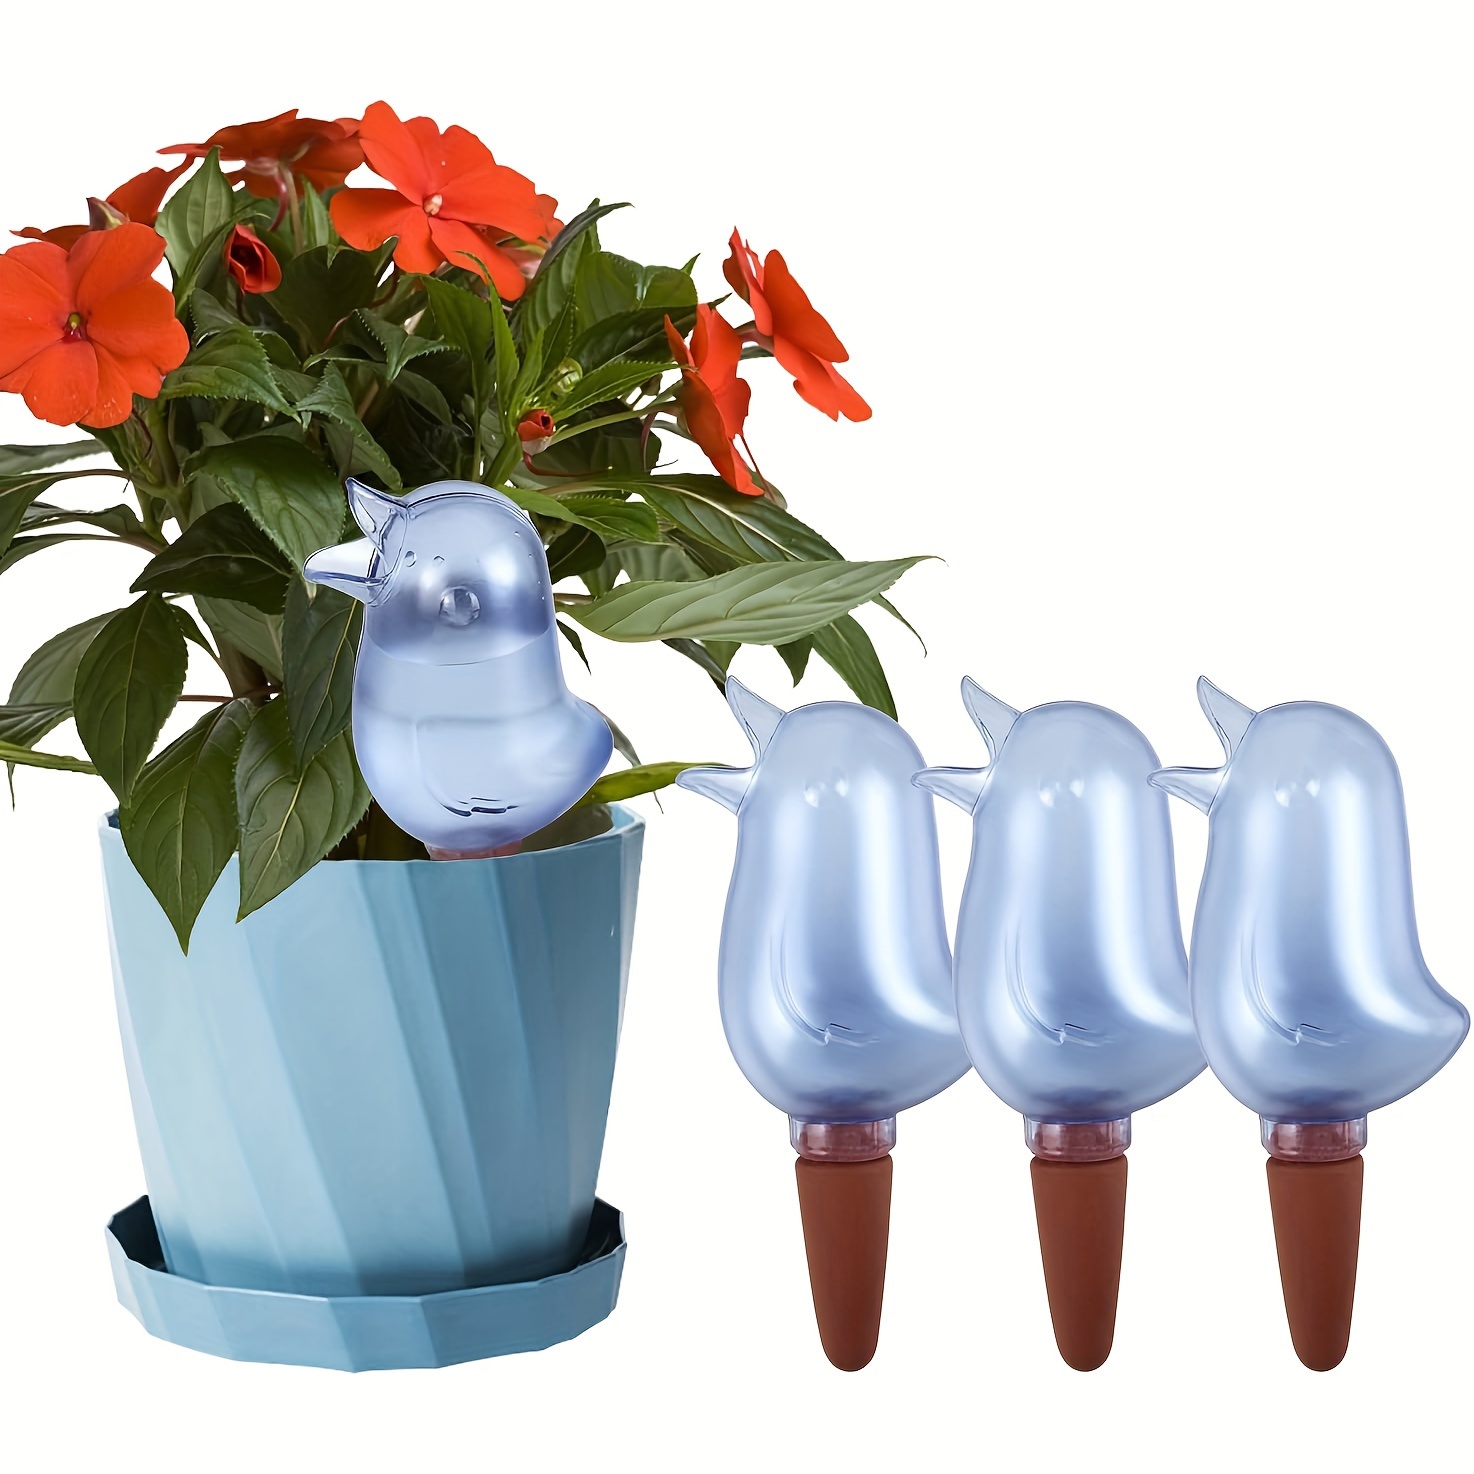 

Automatic Plant Waterer Spike Globes - 4 Pcs Self-watering Devices For Indoor & Outdoor Potted Plants, Flowers | Planter Drip Irrigation Stakes